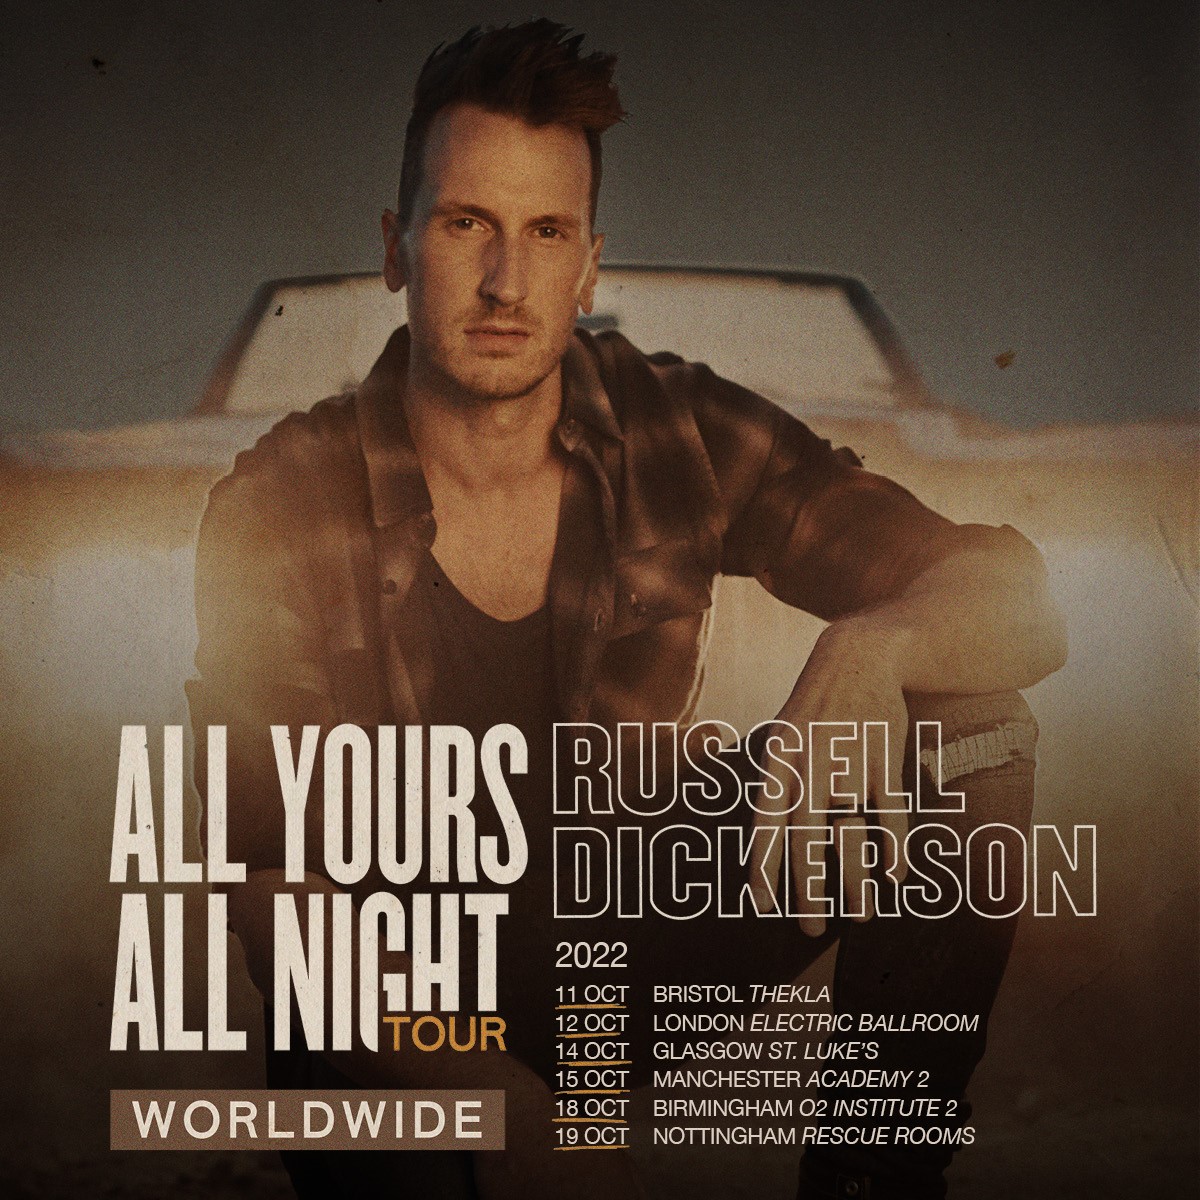 Buy Tickets for Russell Dickerson Rescue Rooms Nottingham